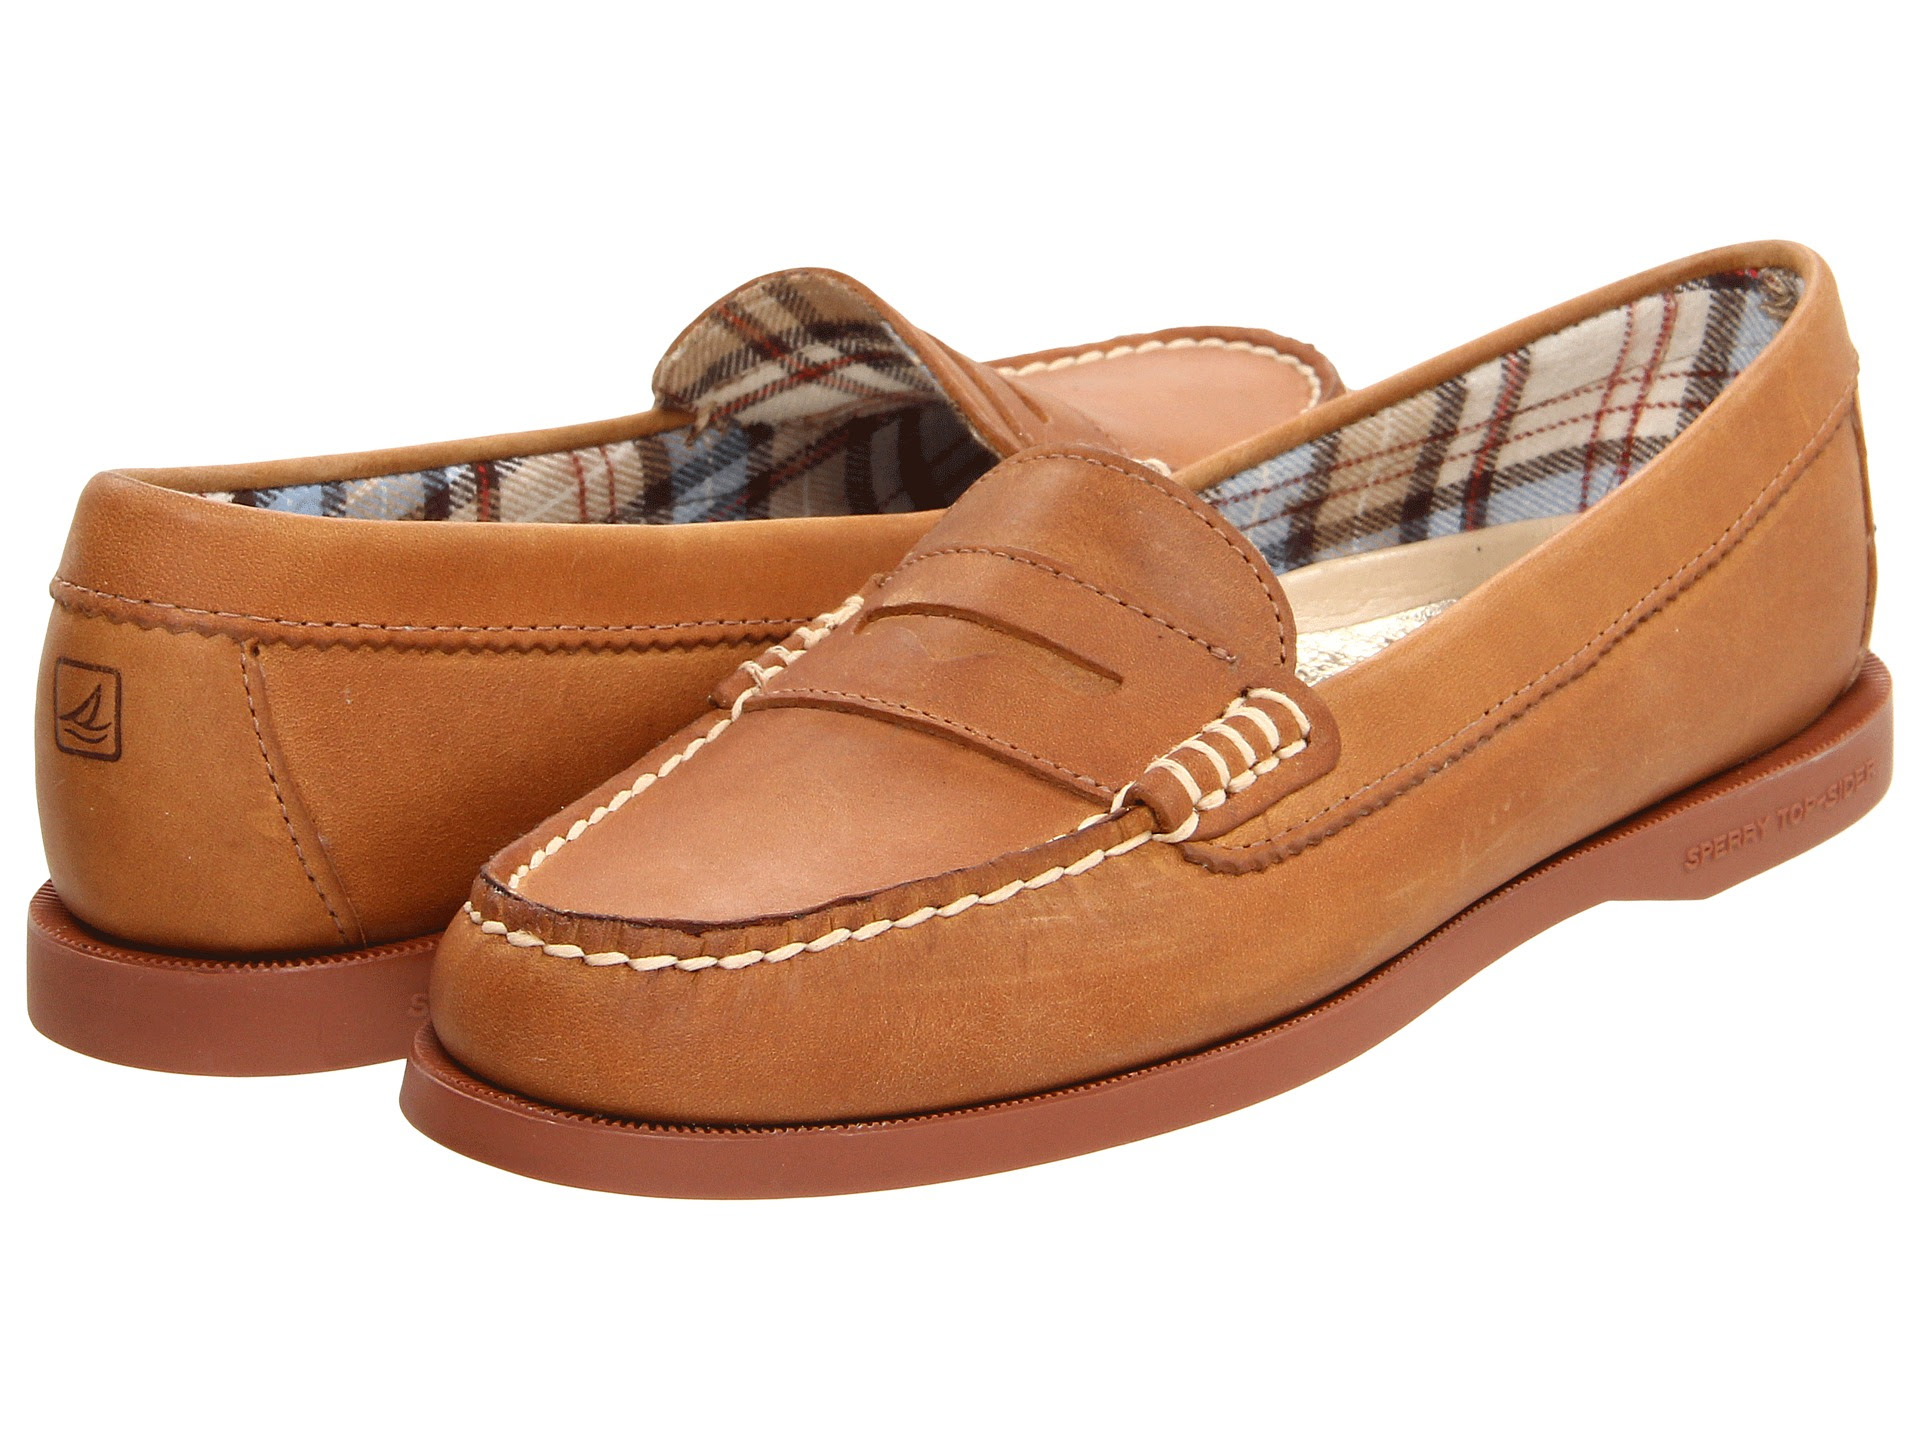 Sperry Top Sider Hayden Sahara | Shipped Free at Zappos